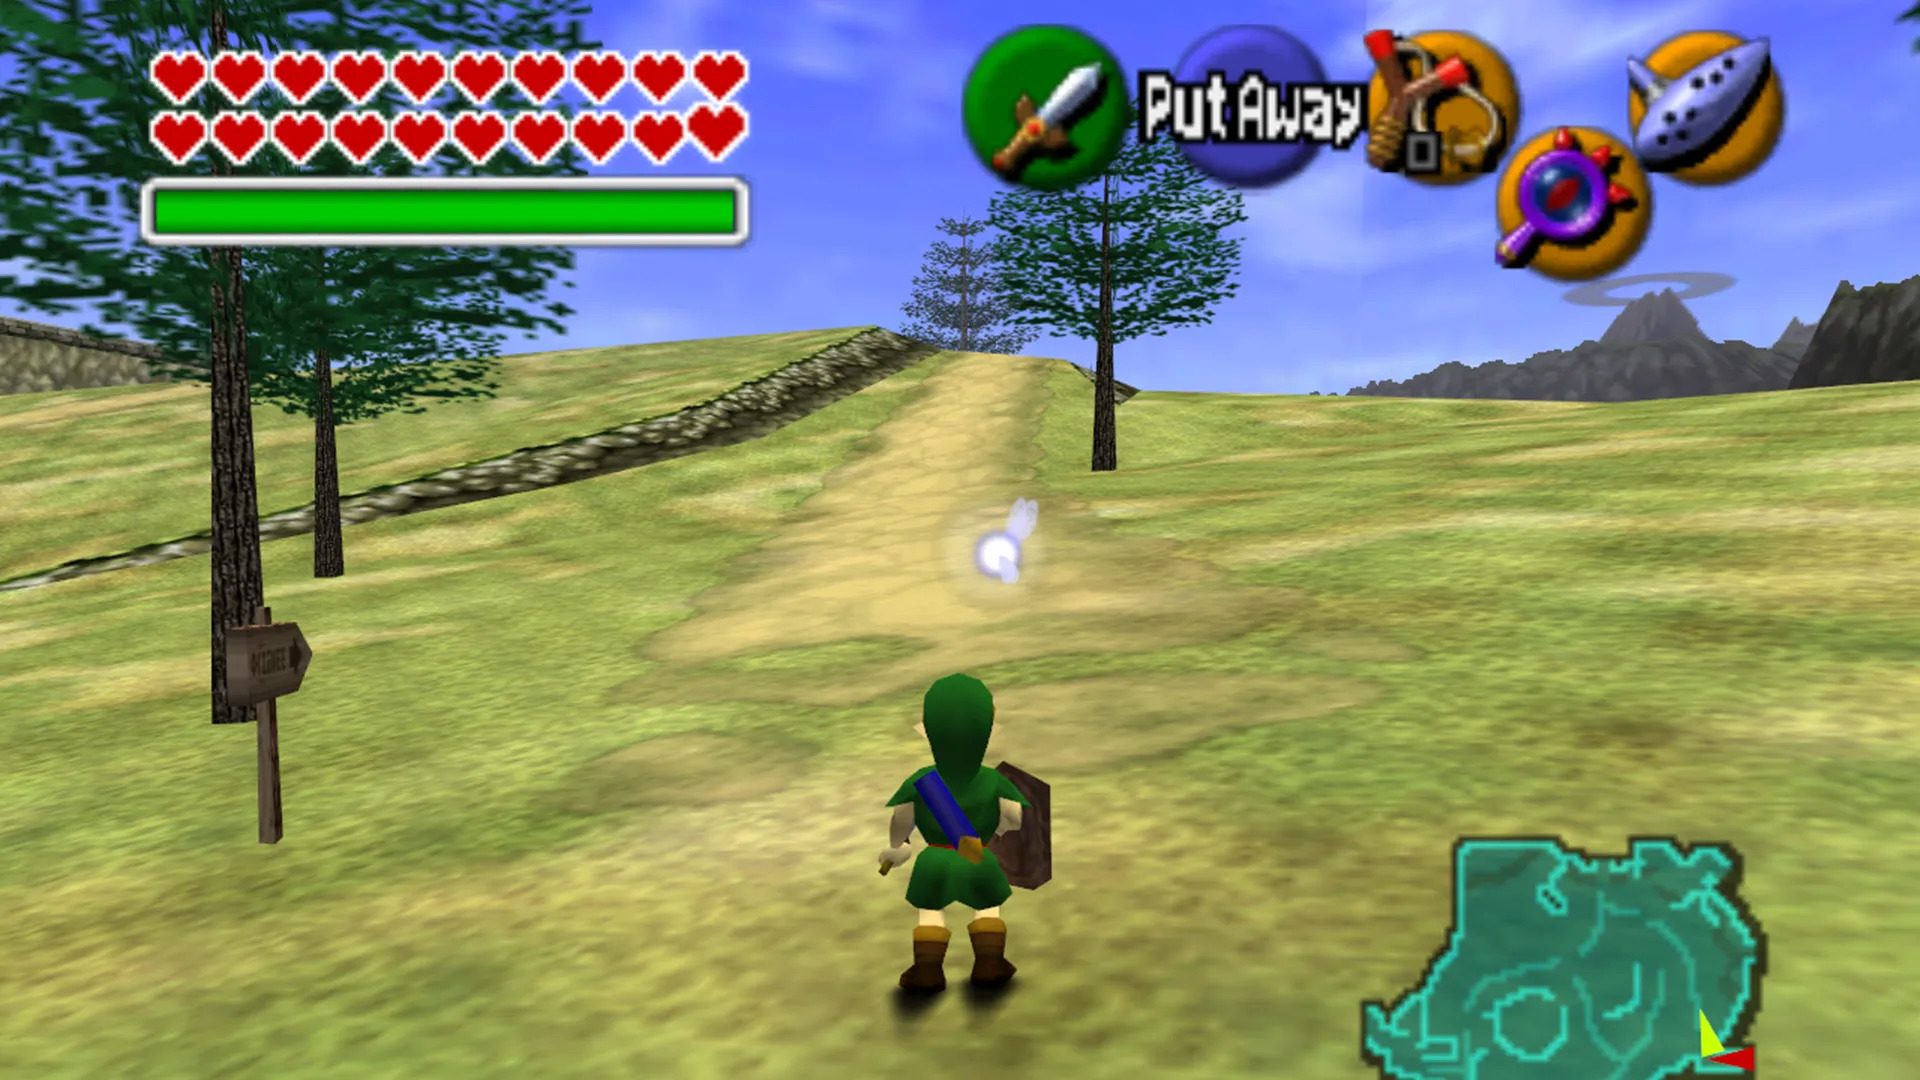 With Ocarina of Time, the series entered the 3D realm for the first time